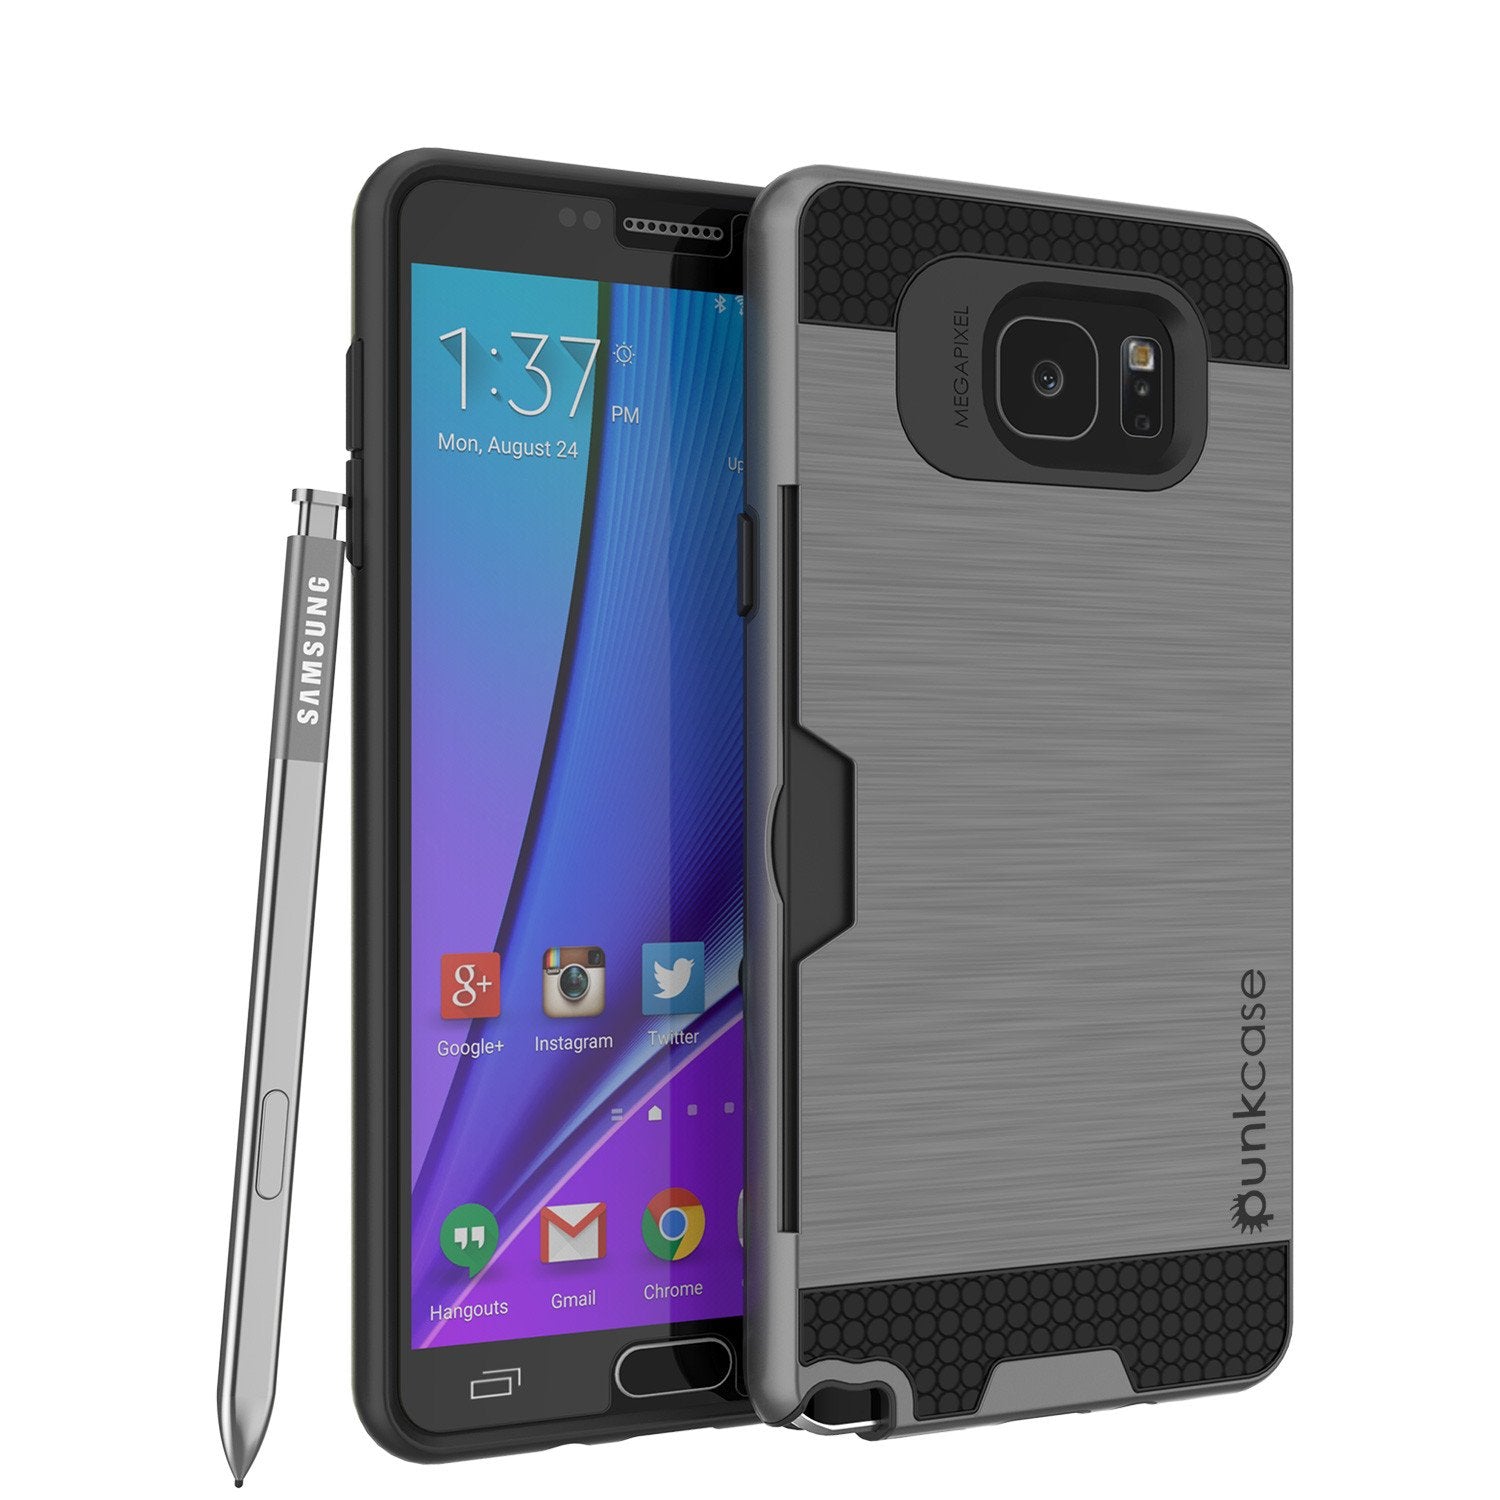 Galaxy Note 5 Case PunkCase SLOT Grey Series Slim Armor Soft Cover Case w/ Tempered Glass - PunkCase NZ